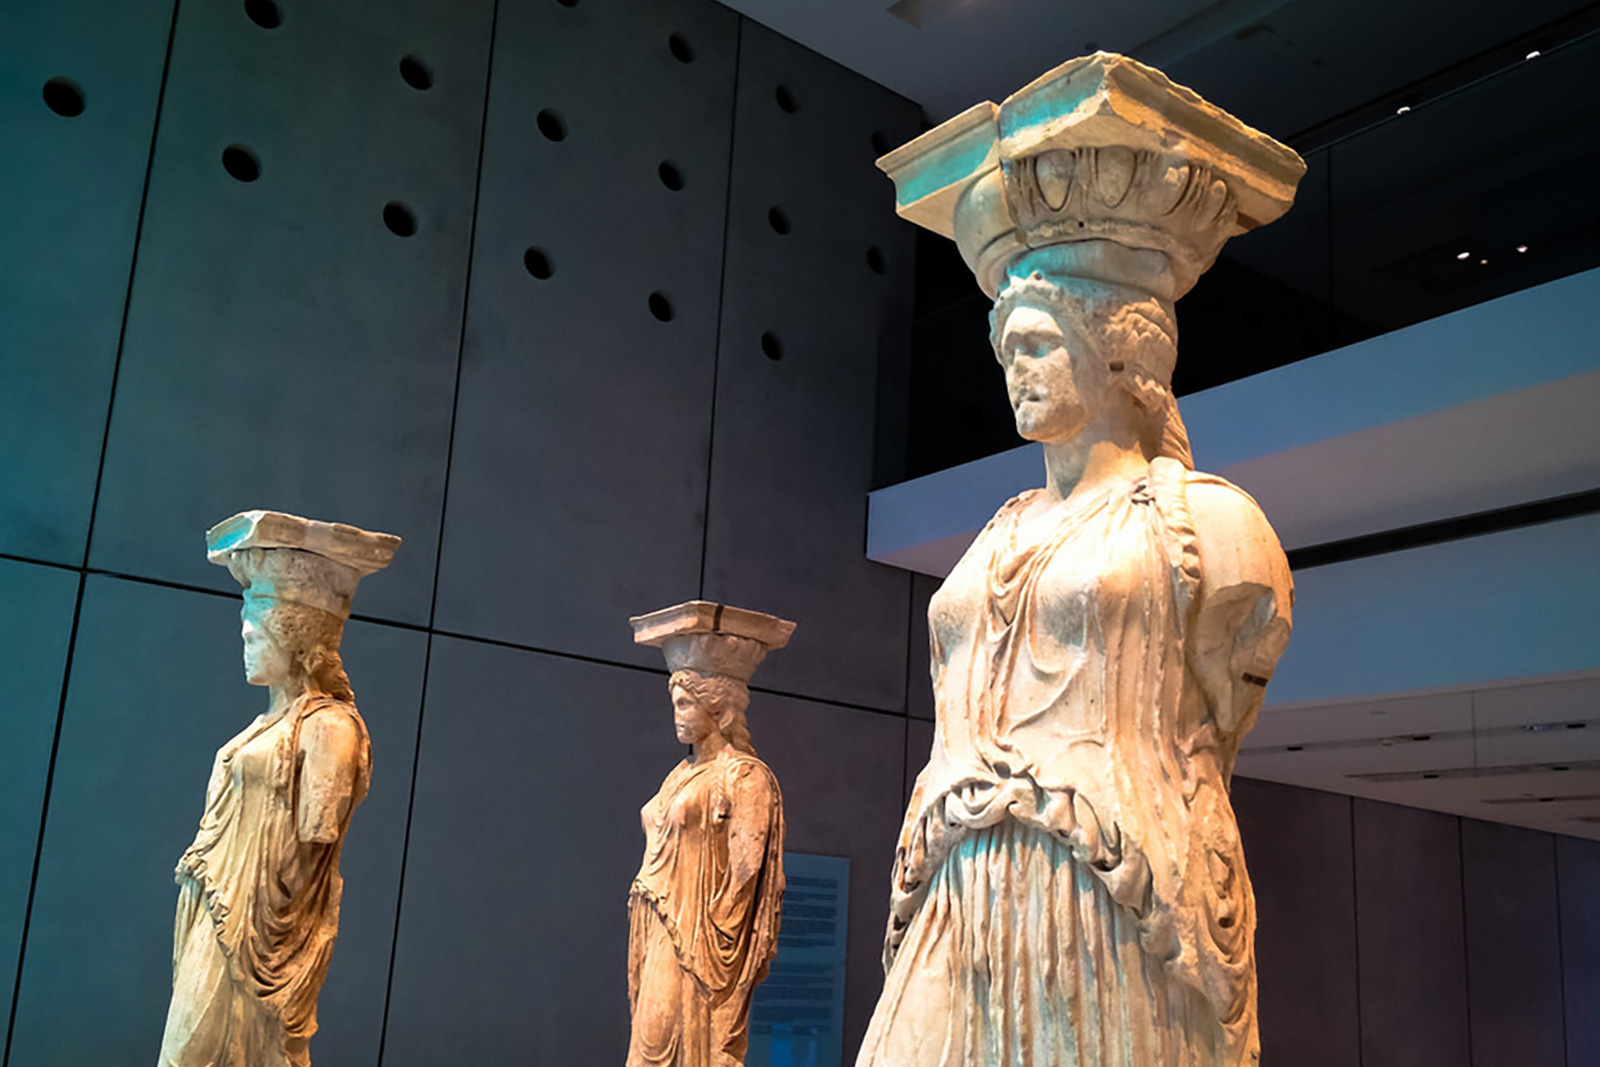 Statues of women in the New Acropolis Museum in Athens, Greece.